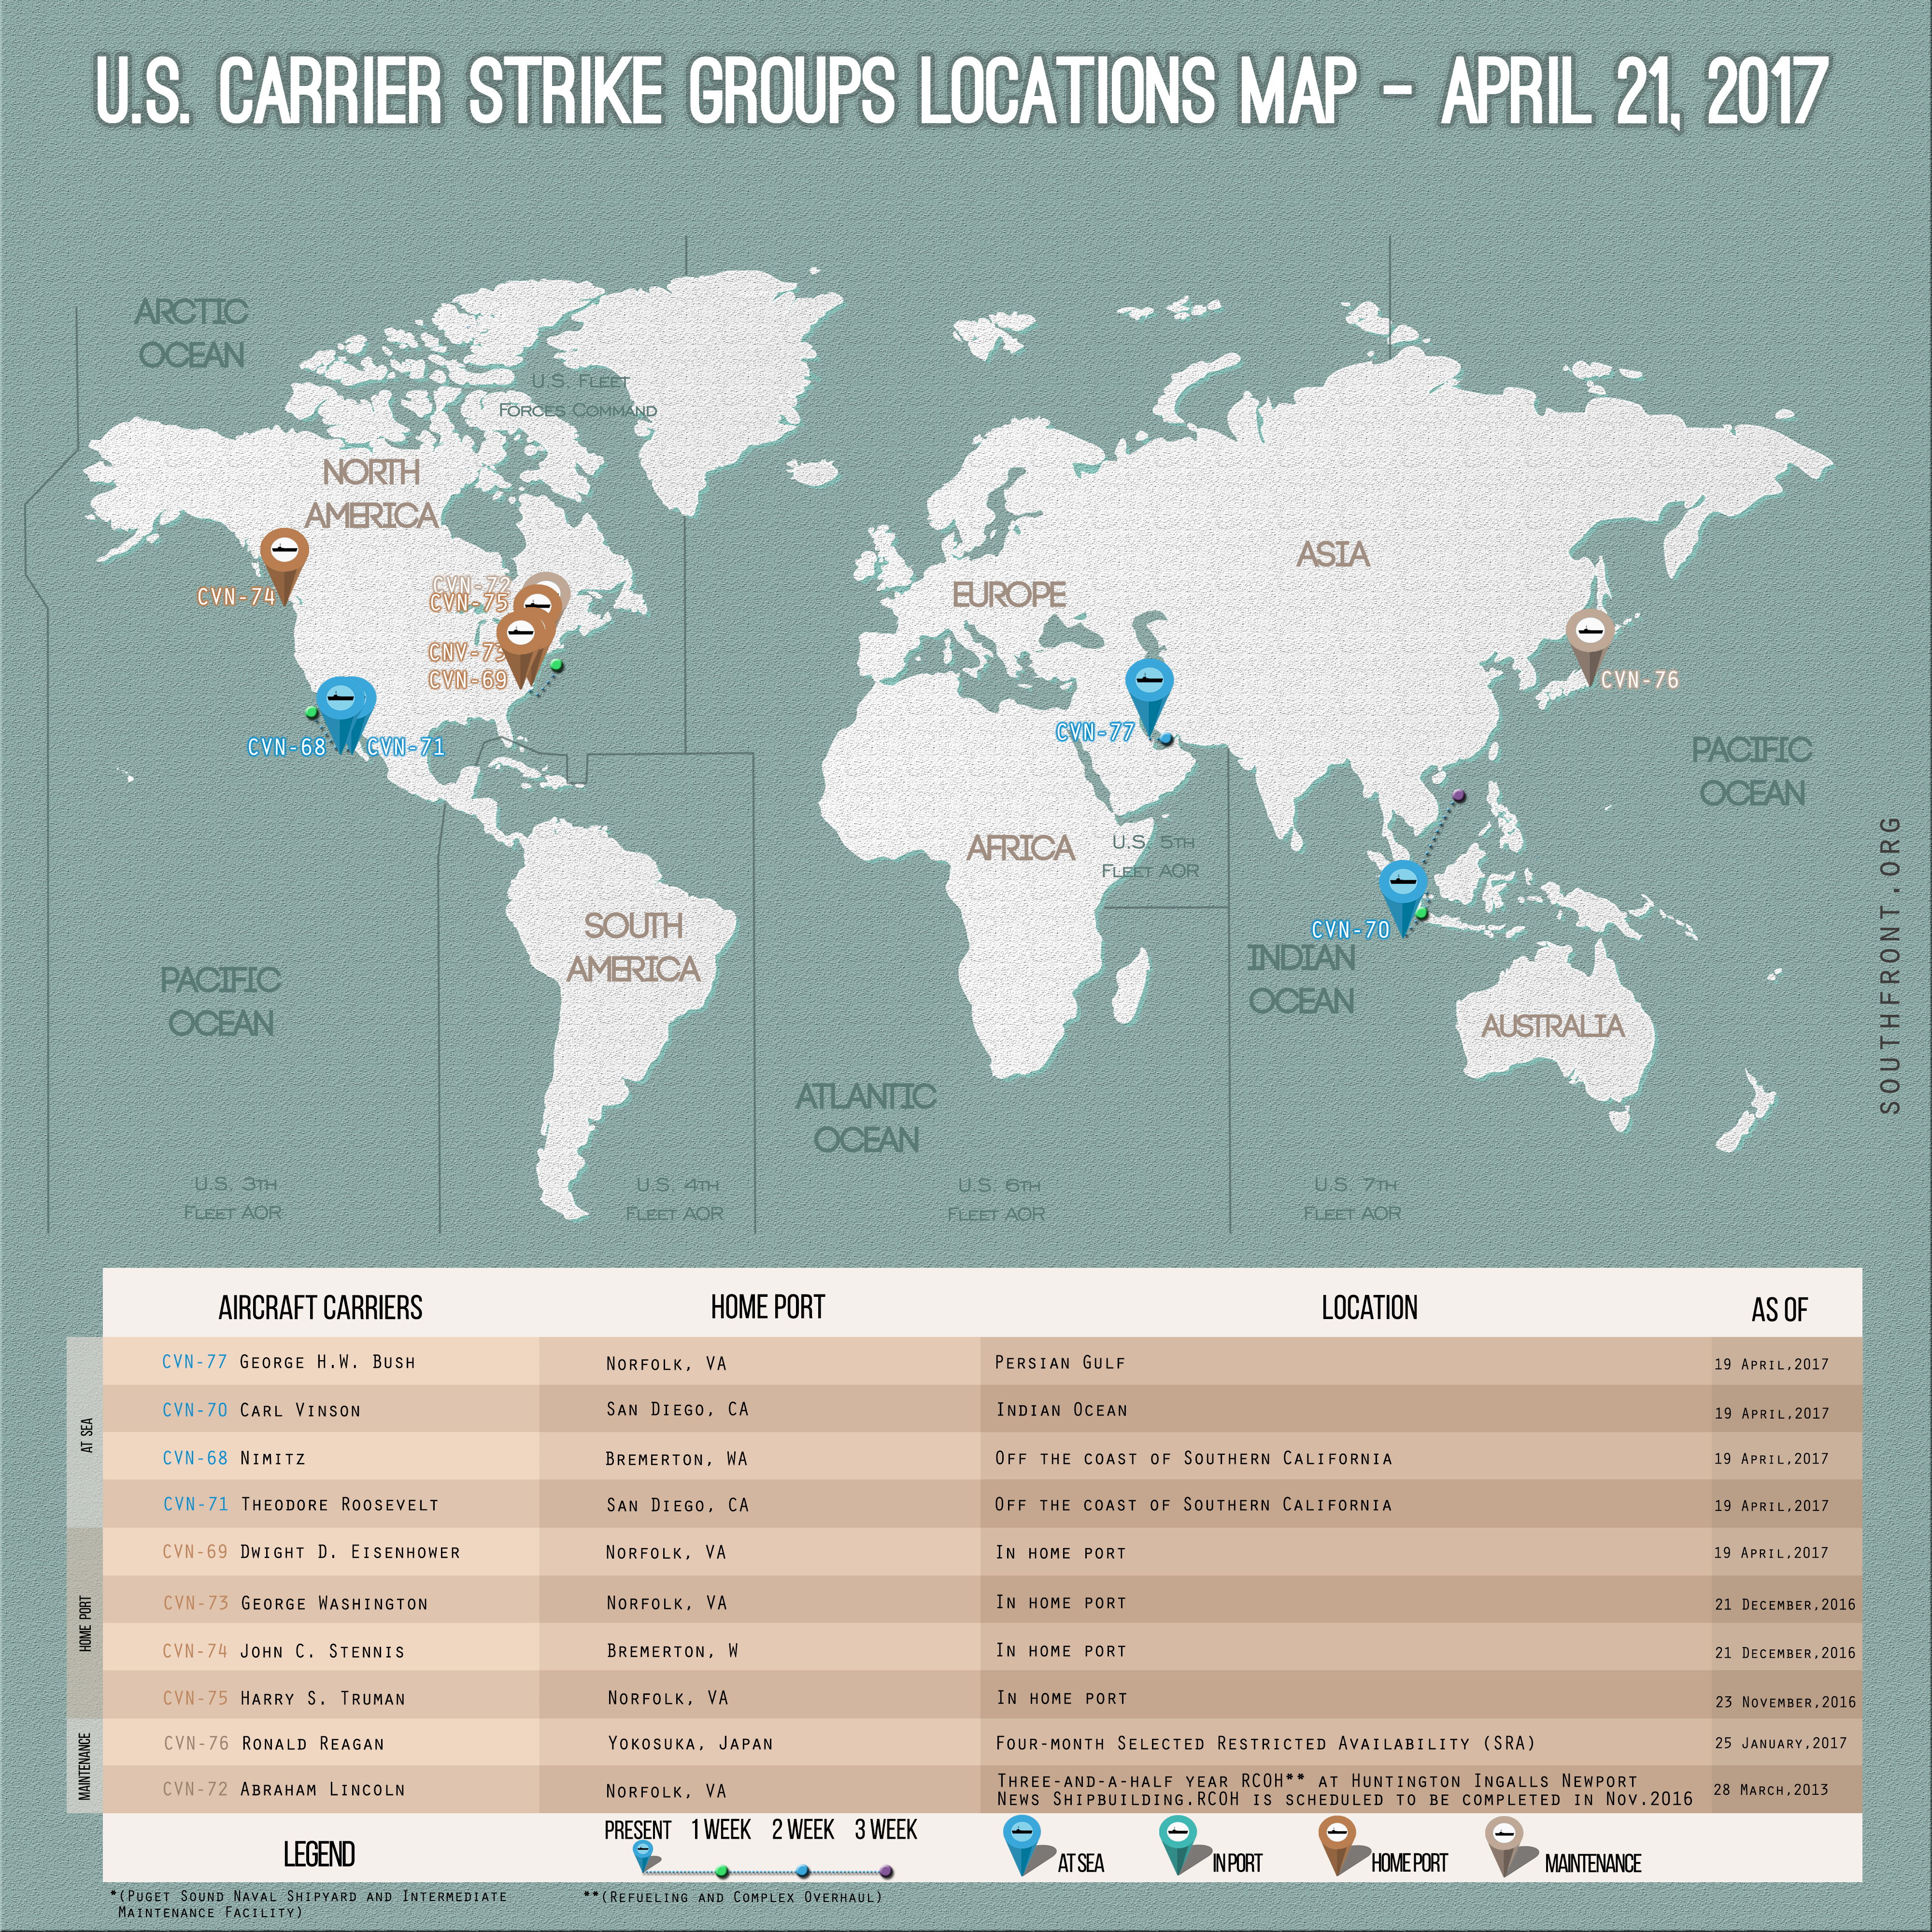 US Carrier Strike Groups Locations Map – April 21, 2017